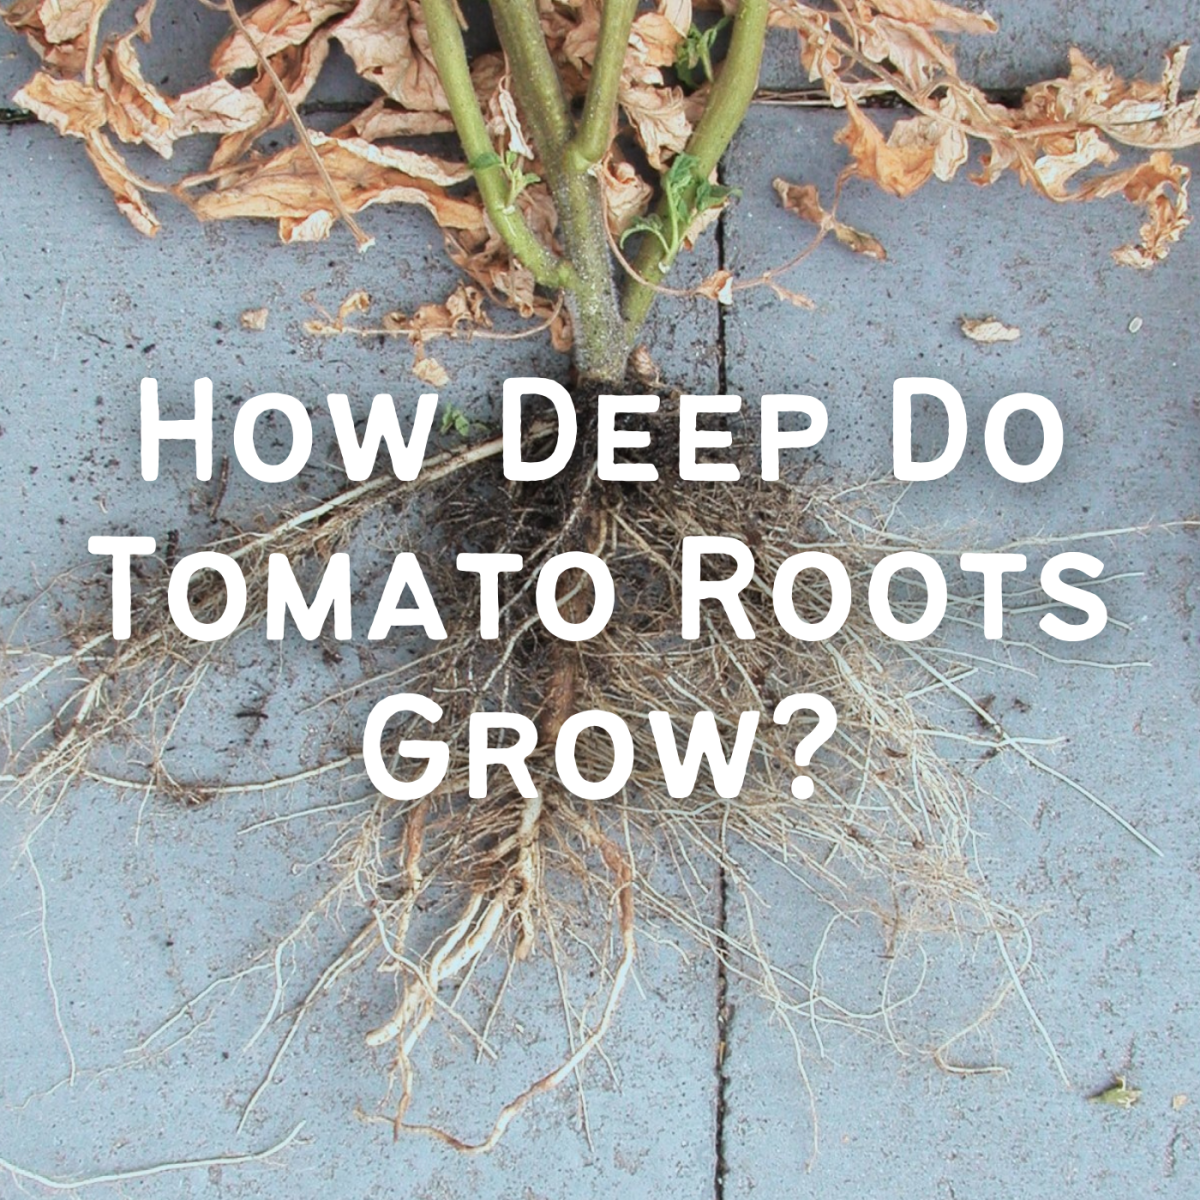 An effective root system on a determinate tomato variety. Notice the bunch of roots that have grown out of the buried stem.